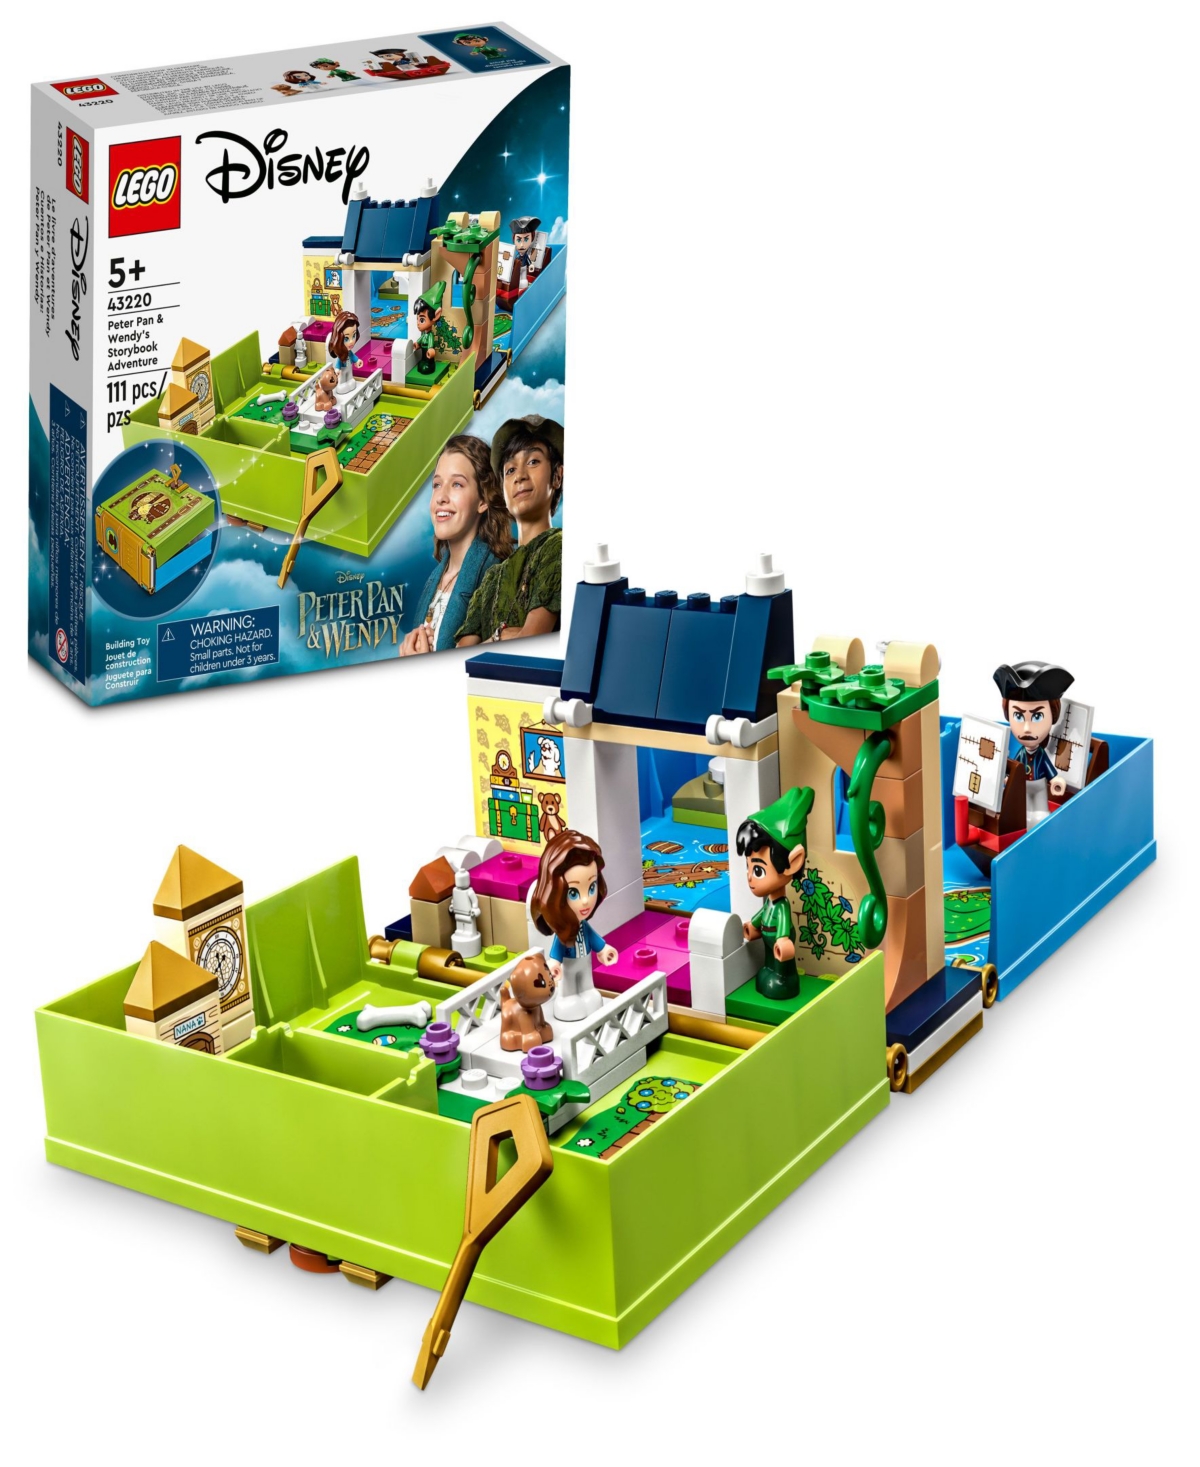 Lego Babies' Disney 43220 Classic Peter Pan & Wendy's Storybook Adventure Toy Building Set With Peter Pan, Wendy In Multicolor